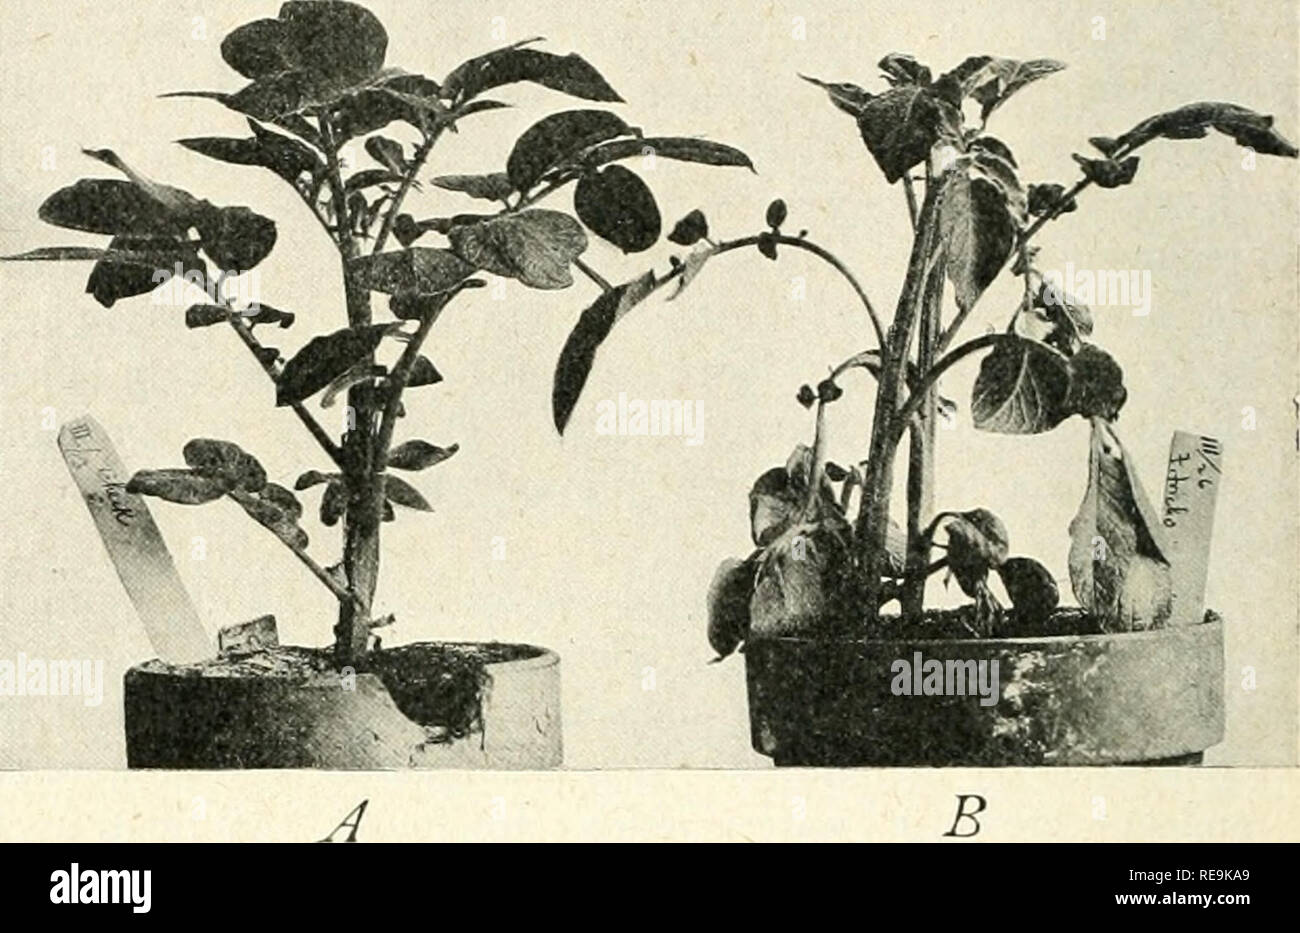 . Contributions from the Hull Botanical Laboratory. Plants. i6 Research Bulletin No. g the major part of the potato troubles to the activity of this organism. Even though it is not the sole or even the main cause of Nebraska potato troubles it may play an important role. The work of Appel (2), Corsault (8), Drayton (9), and Morse and Schap- ovalov (26) gave results similar to those obtained by Rolfs (31.32).. Fig. 2.—Wilt produced in laboratory with Fusarium trichothecioides, and control plant; A, control, Early Ohio variety; B, wilting and drying of leaves, 4 days after inoculation, Early Ohi Stock Photo